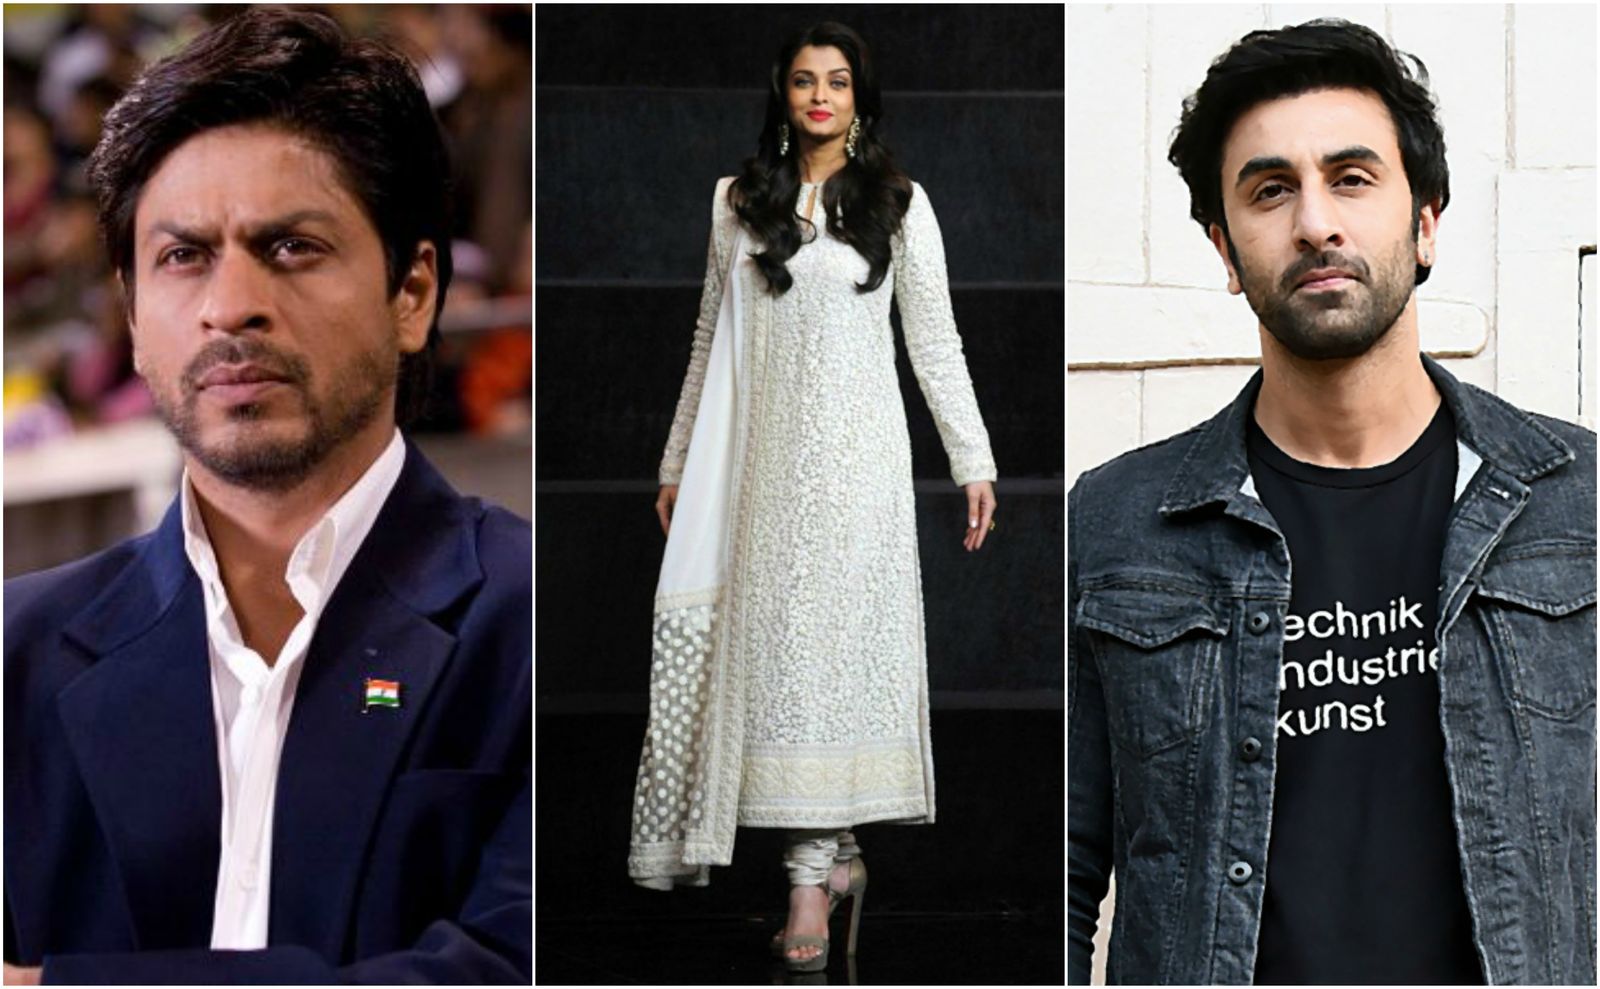 Shah Rukh Khan, Aishwarya Rai Bachchan, Ranbir Kapoor And Others  Shoot For A Special Song In Memory Of The Pulwama Attack Martyrs